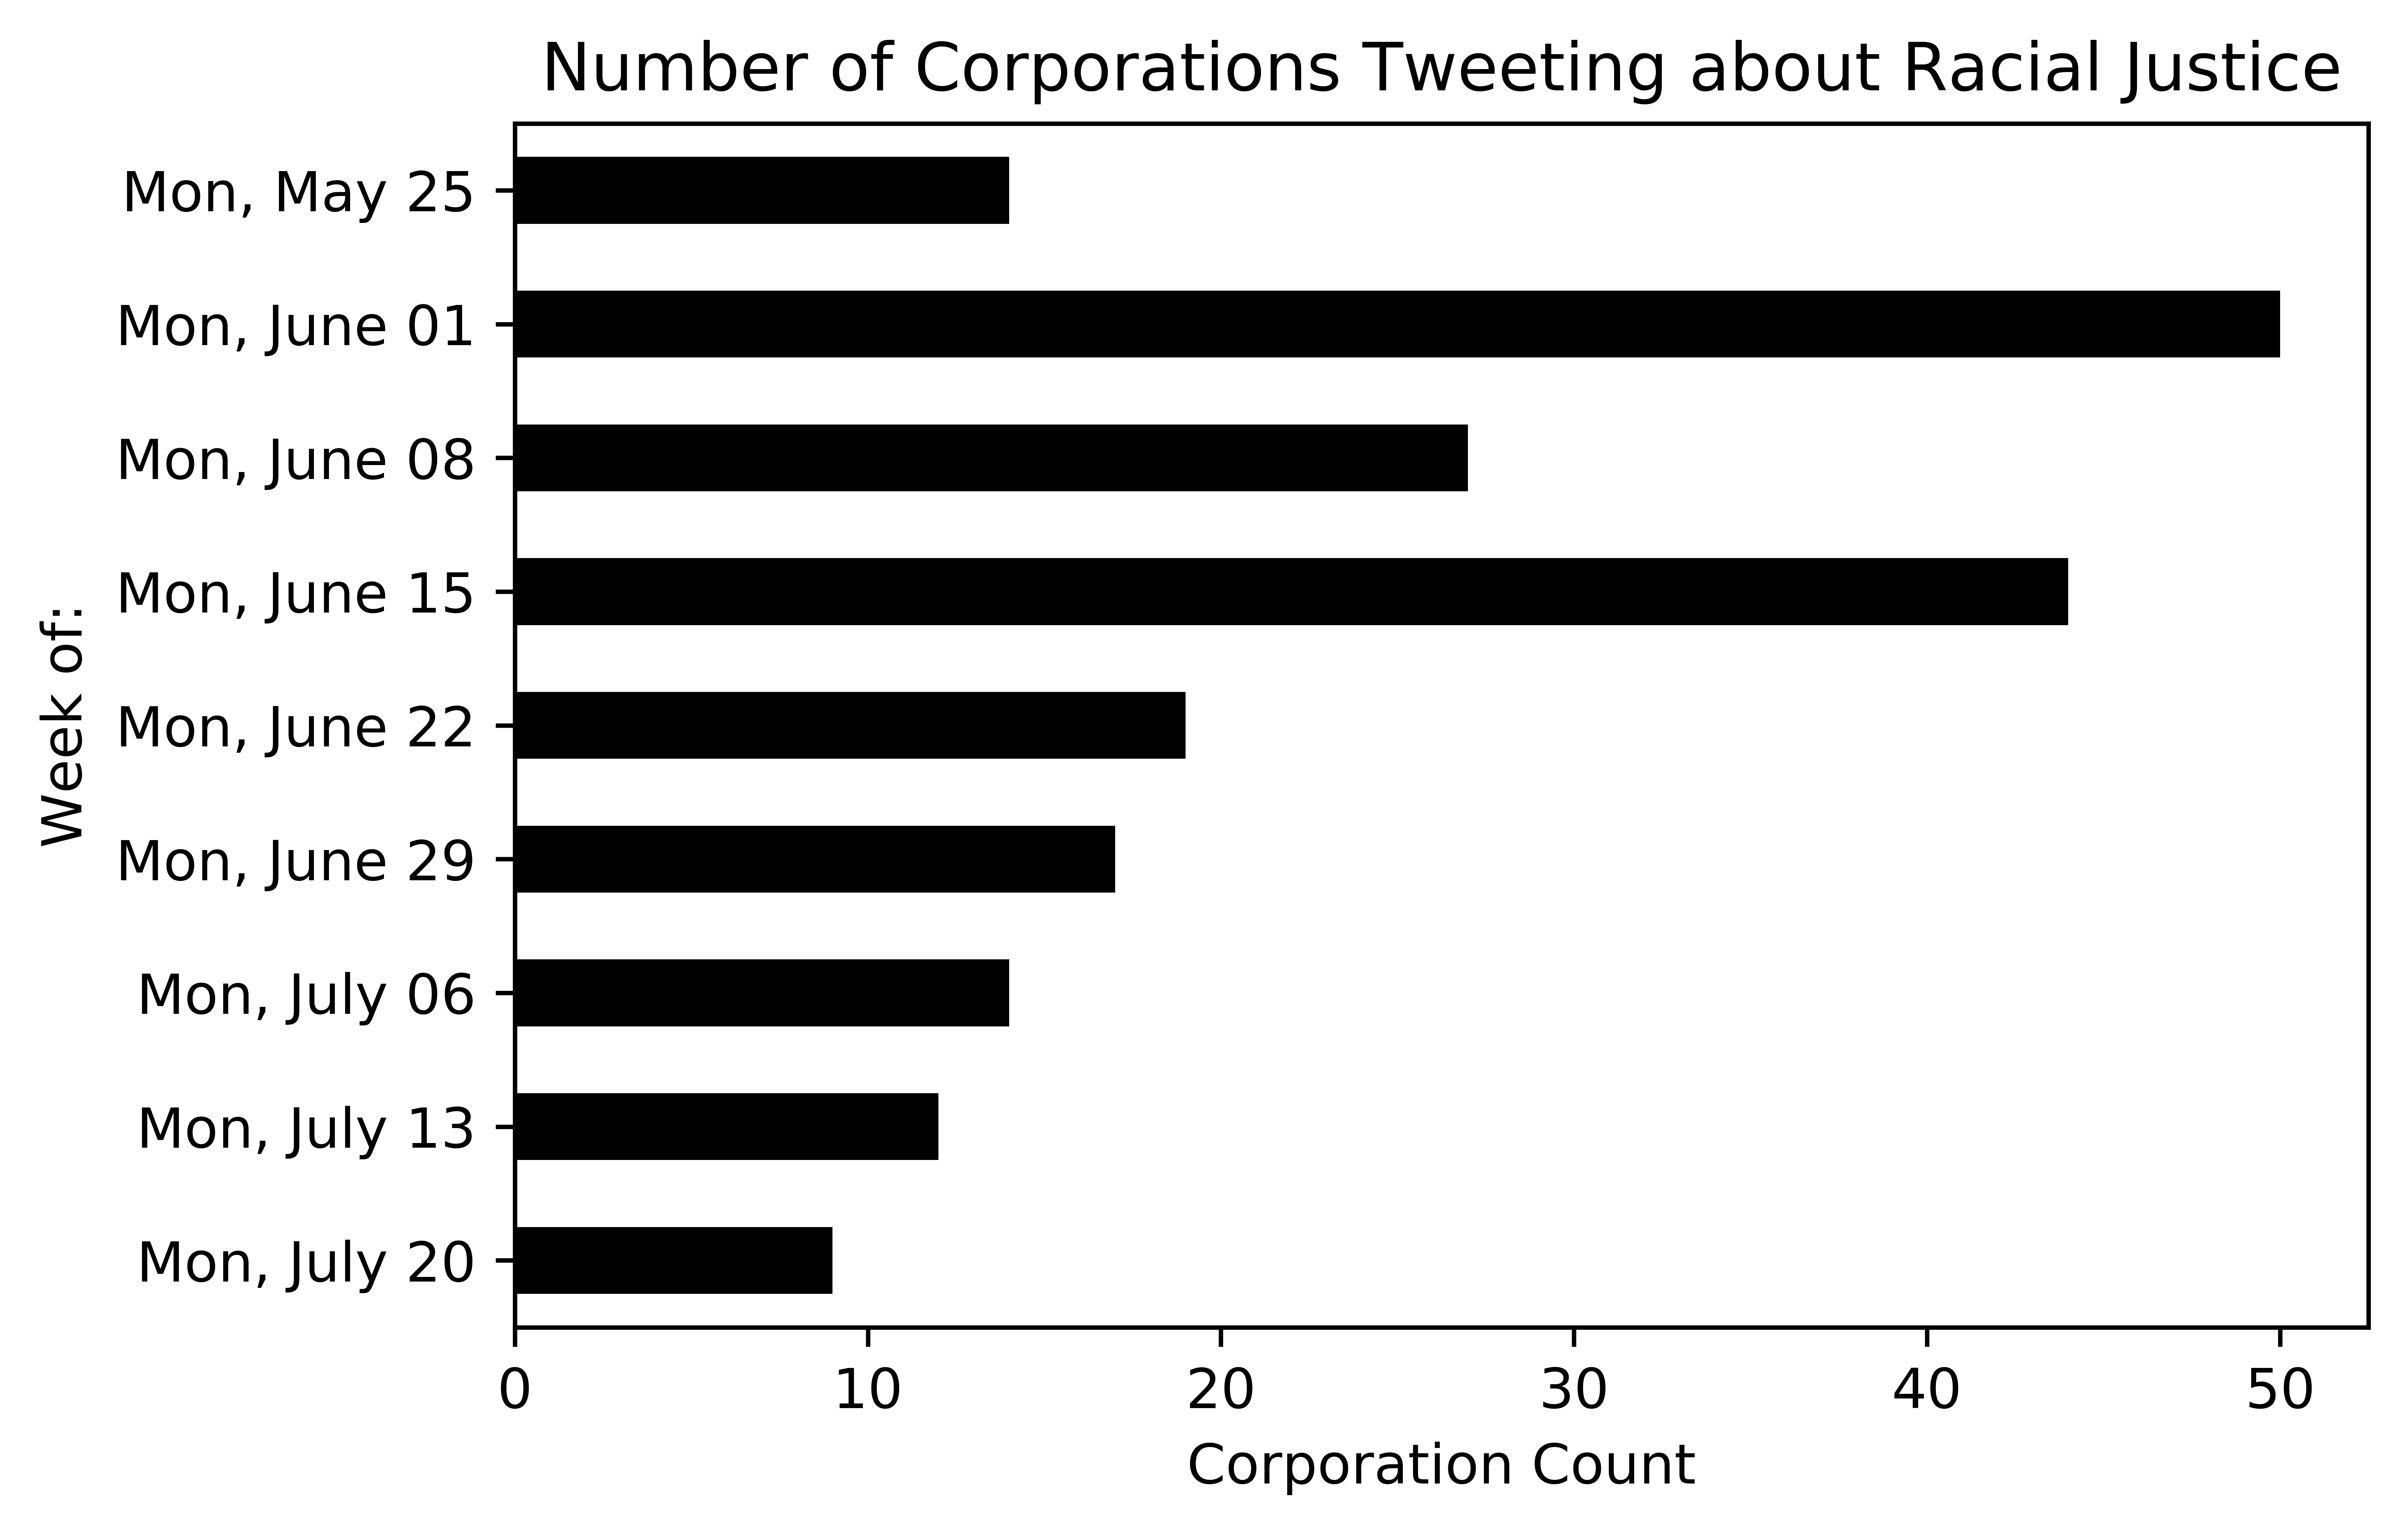 Corporate RJ count by week